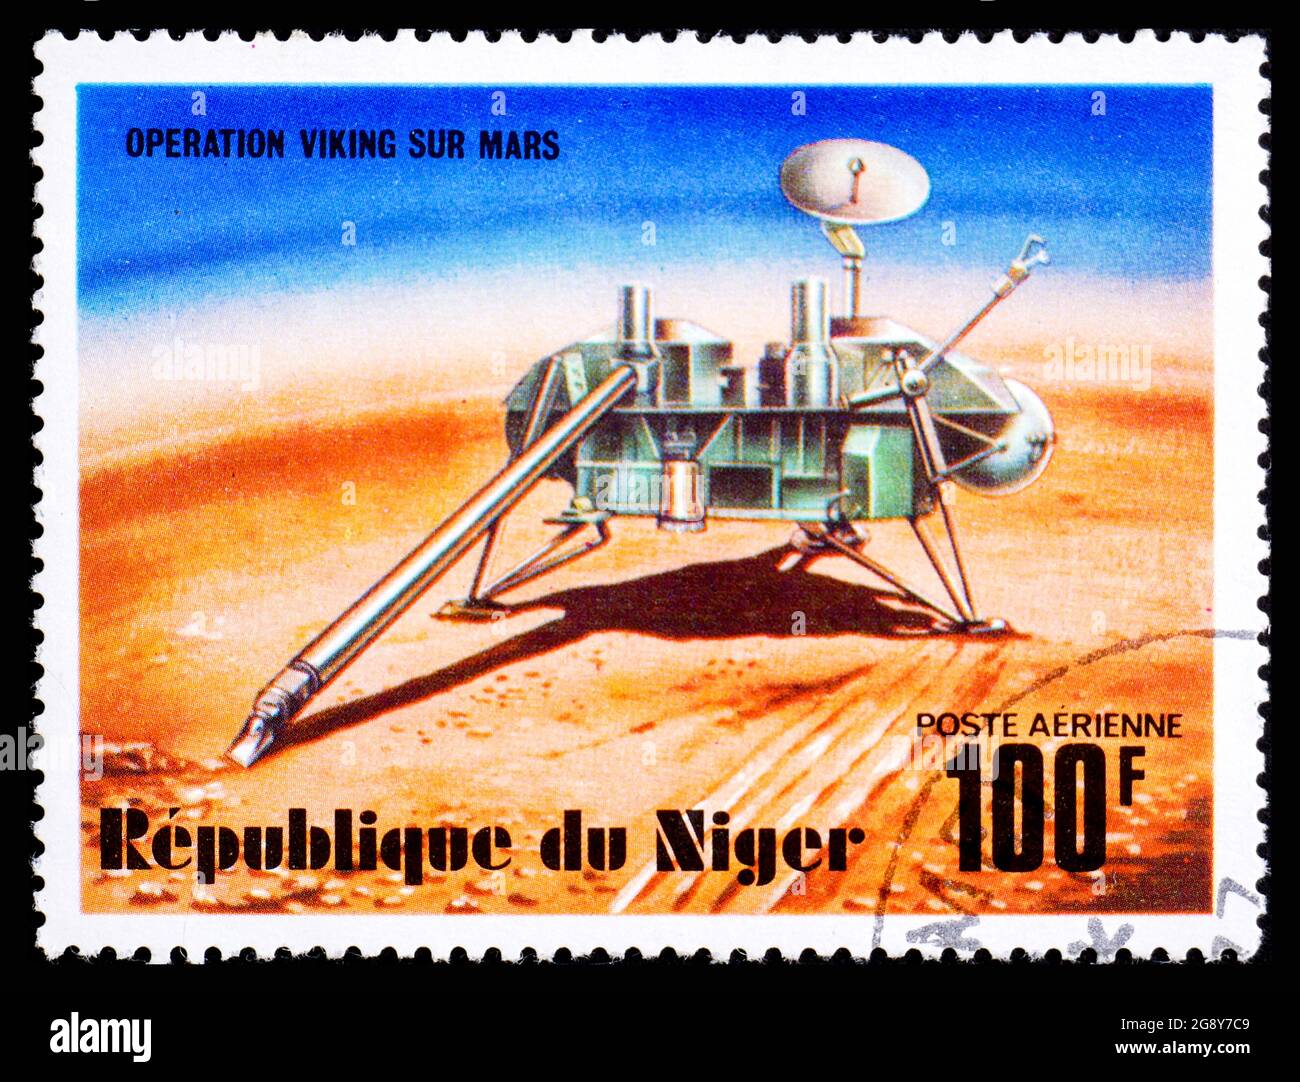 REPUBLIQUE DU NIGER - CIRCA 1977: A postage stamp from Niger showing Viking lander and nprobe Stock Photo